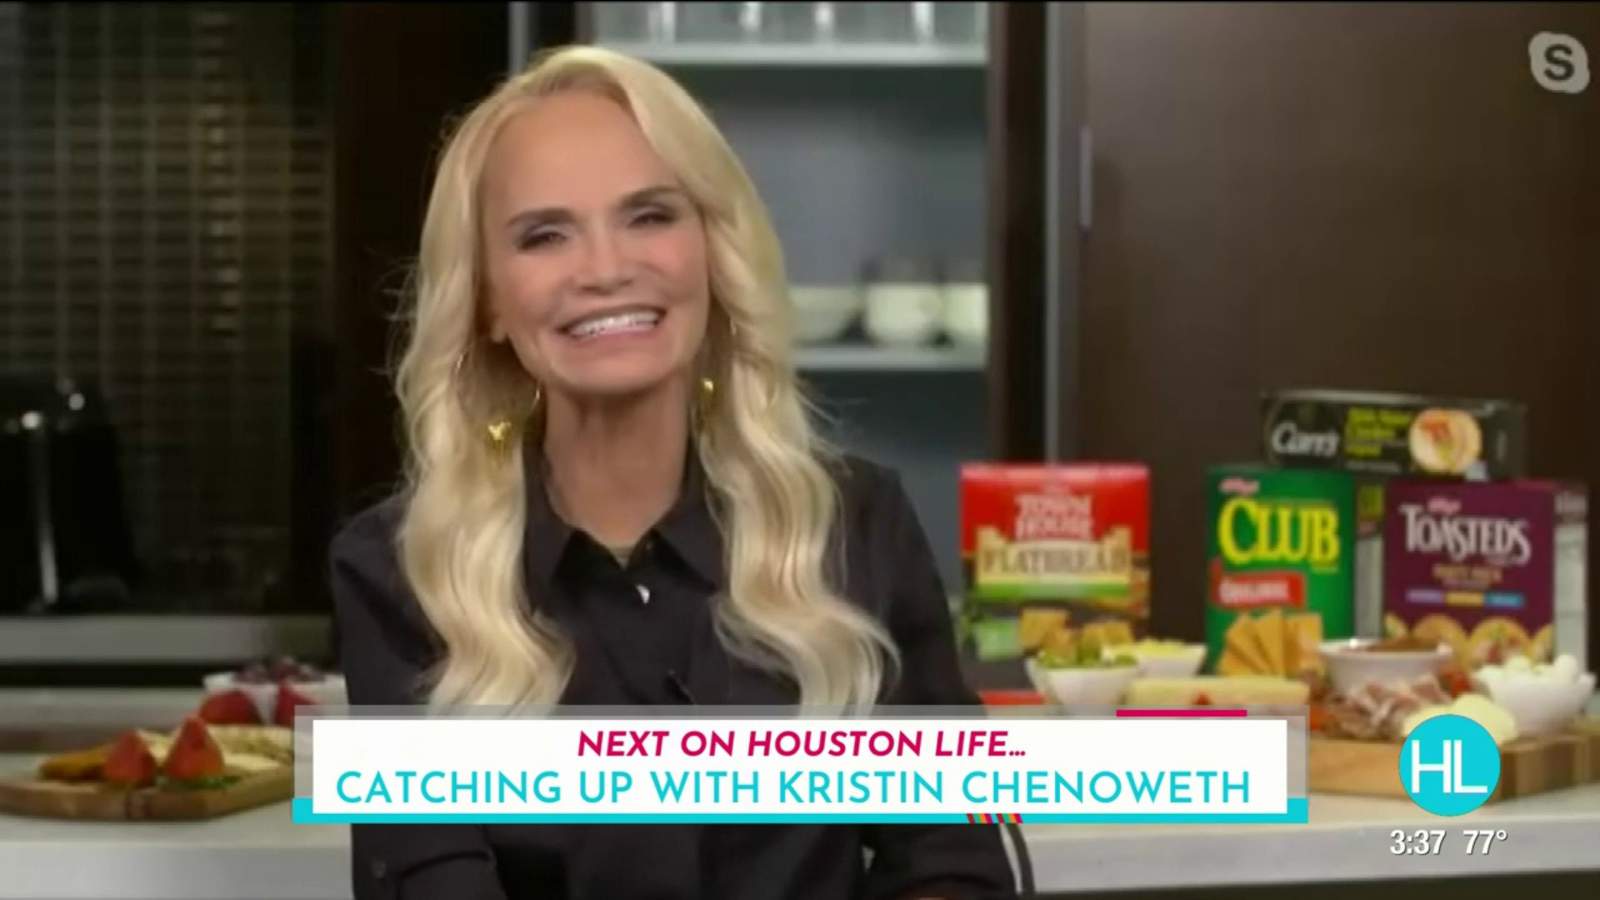 Kristin Chenoweth dishes on life, her new baking competition show, and who taught her how to use Tik Tok